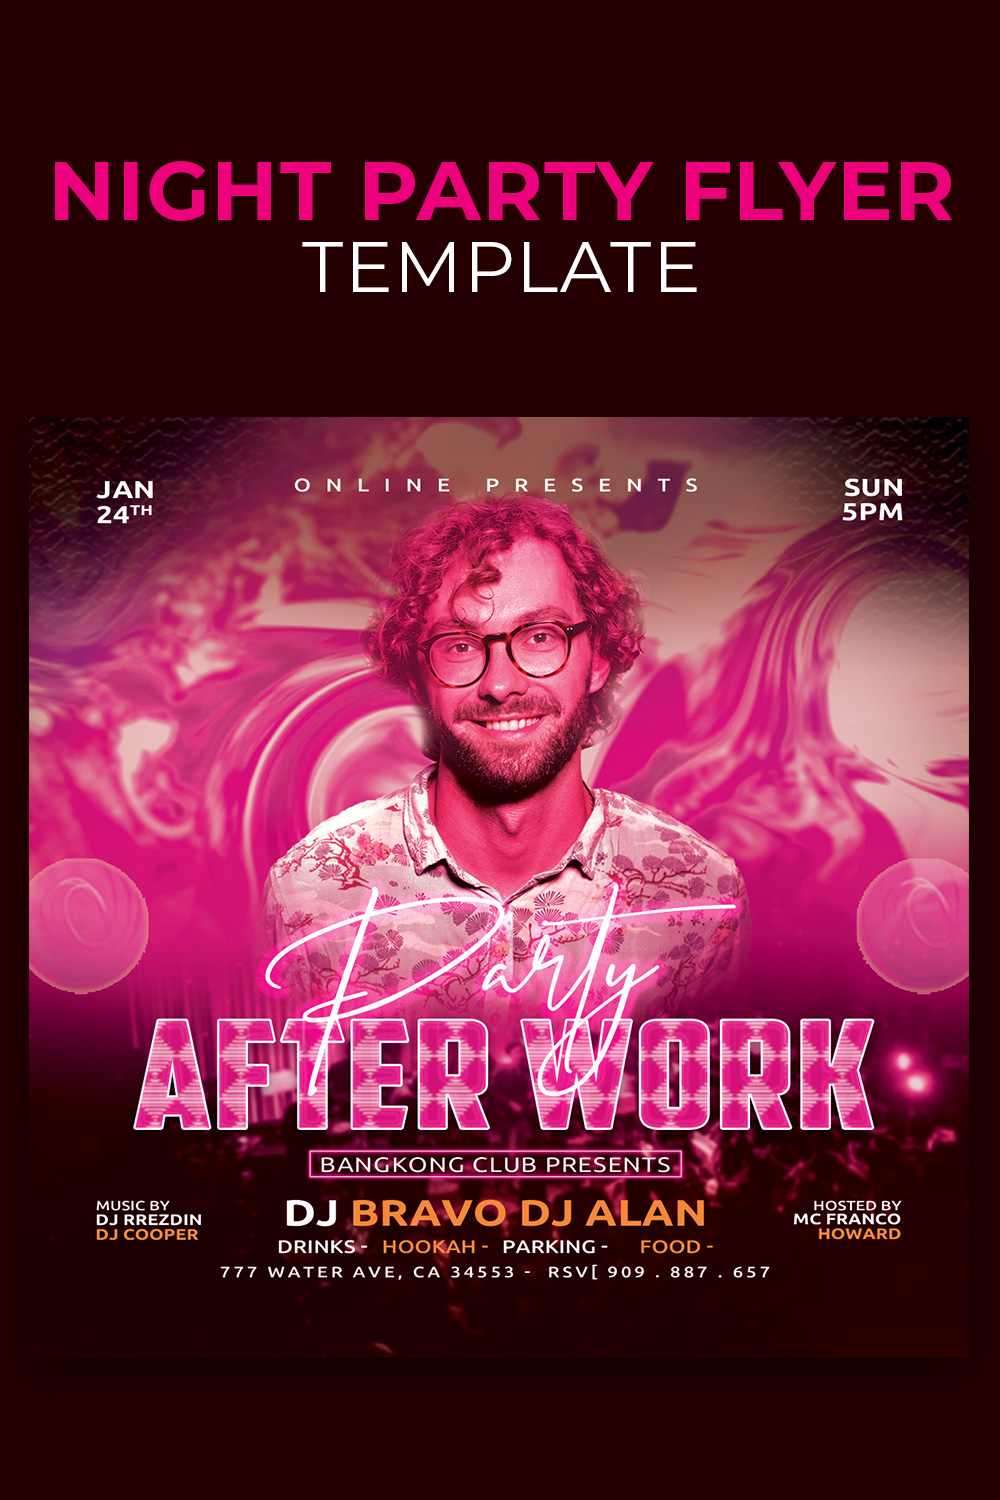 After work night Party Flyer Template Psd pinterest preview image.